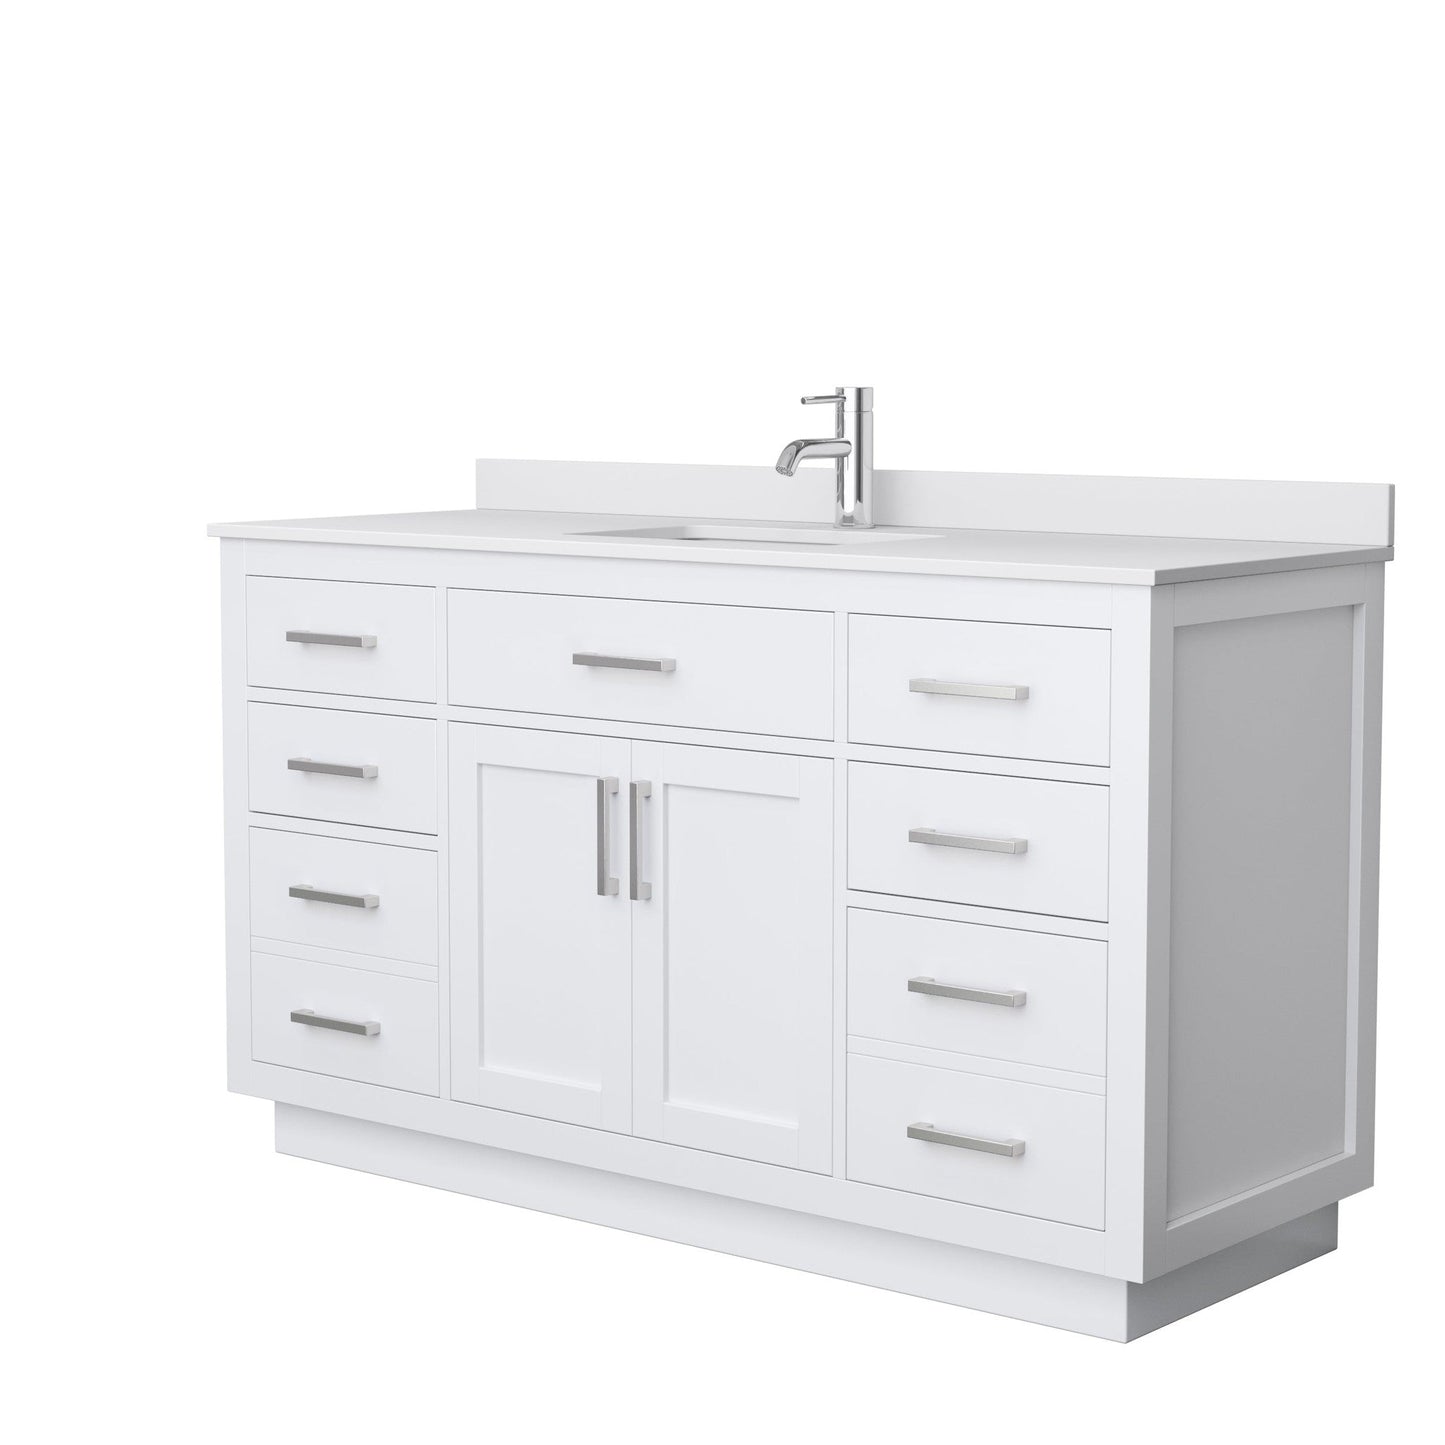 Beckett 60" Single Bathroom Vanity With Toe Kick in White, White Cultured Marble Countertop, Undermount Square Sink, Brushed Nickel Trim